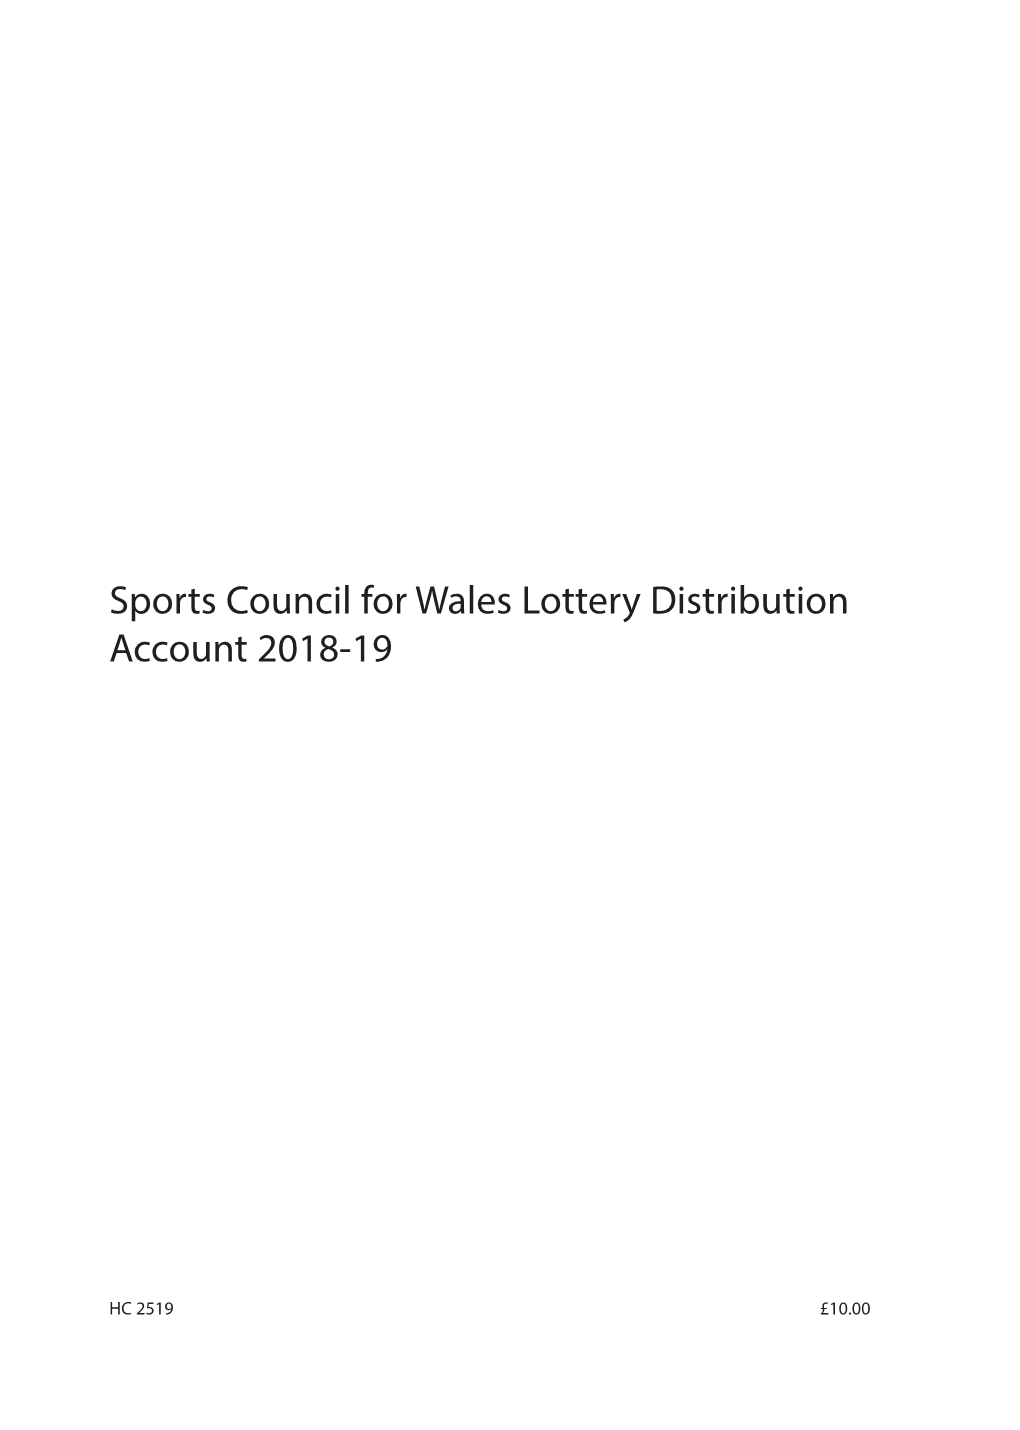 Sports Council for Wales 18-19.Indd